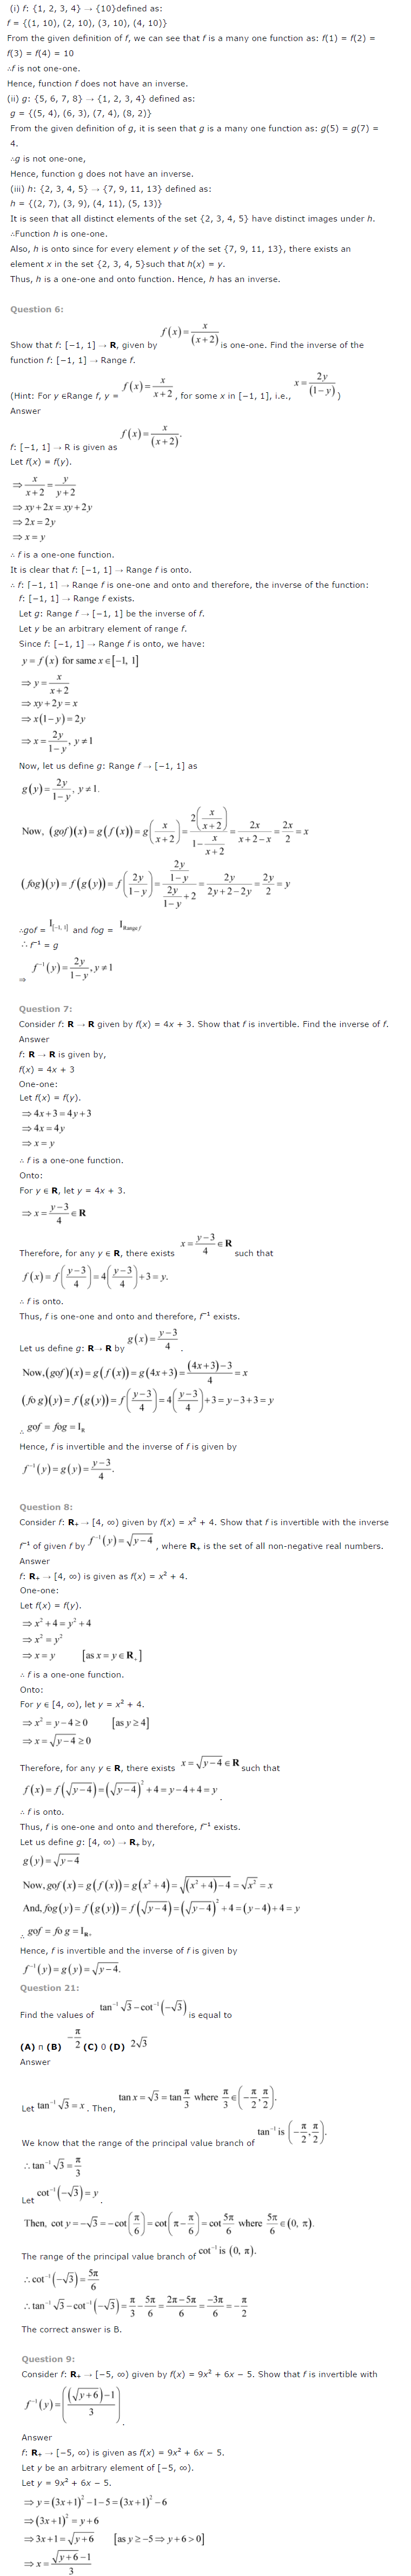 NCERT Solutions For Class 12 Maths Chapter 1 Relations and Functions 6